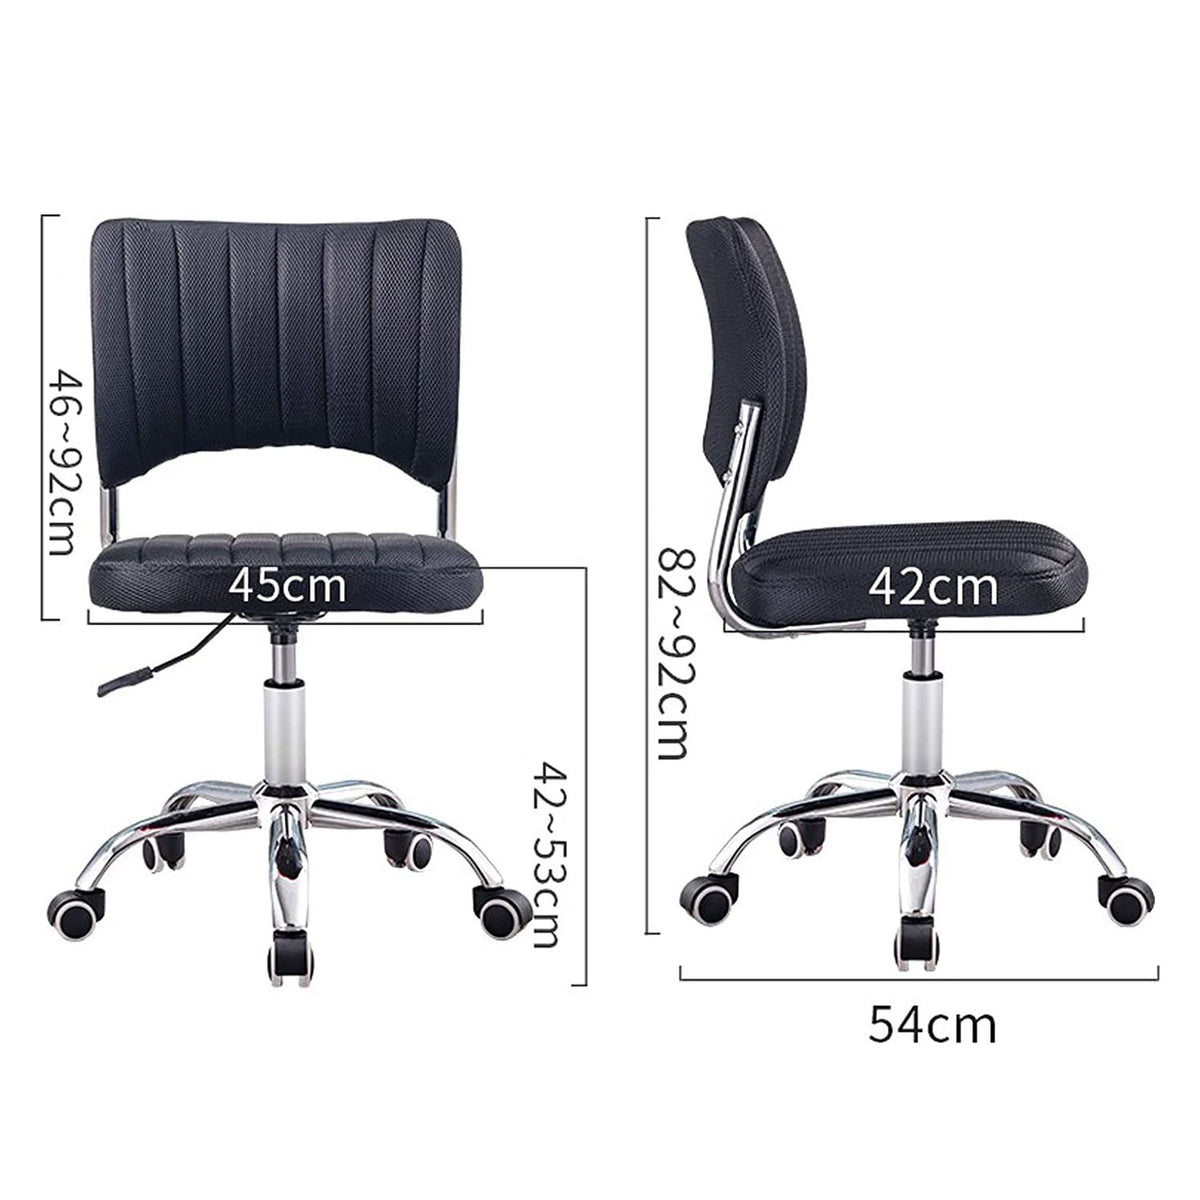 SmileSellers Work Chair Armless Mesh Breathable Swivel Desk Chair Ergonomic Swivel Chair for Home Office Reception Chair Seat Height: 42-53cm